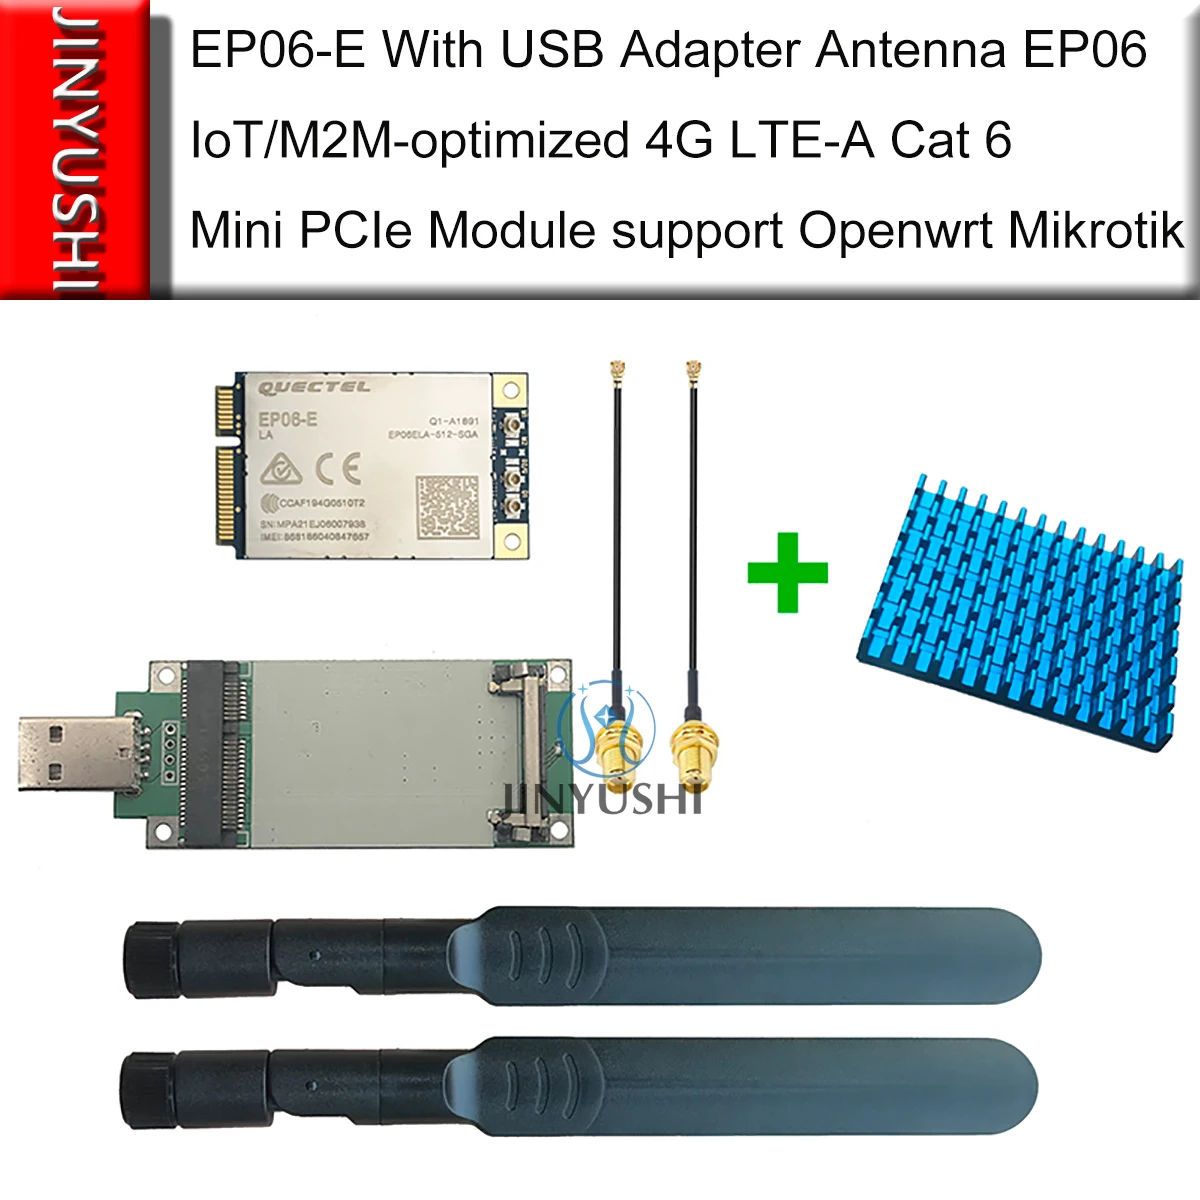 

Quectel EP06-E With USB Adapter Antenna EP06 IoT/M2M-optimized 4G LTE-A Cat 6 Mini PCIe Module support Openwrt Mikrotik